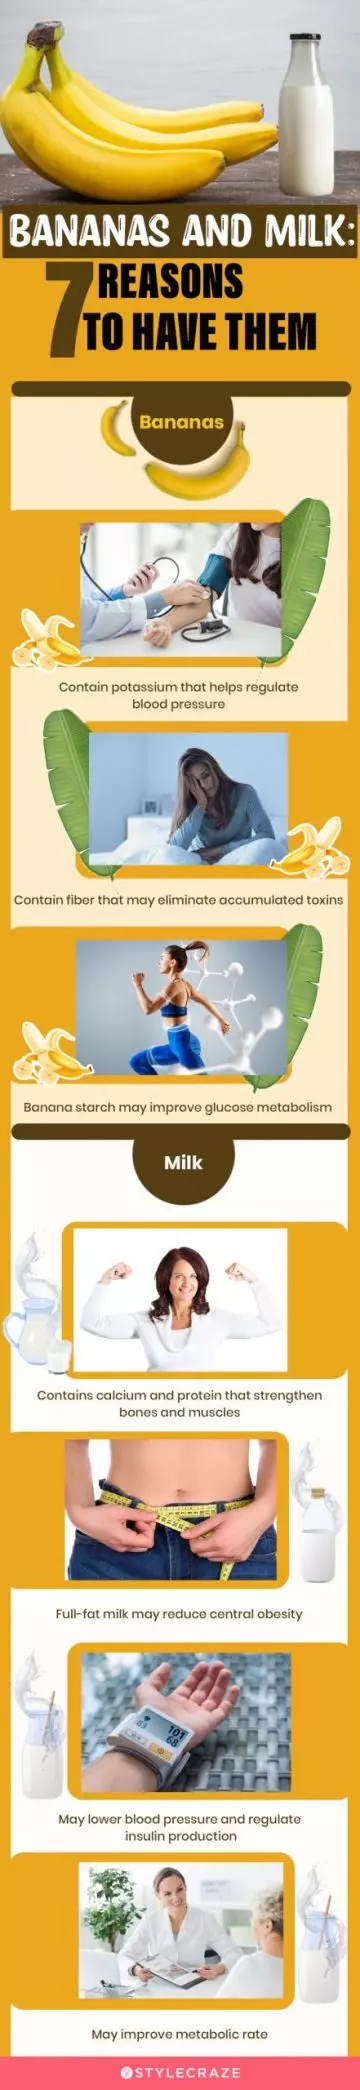 bananas and milk: 7 reasons to have them (infographic)